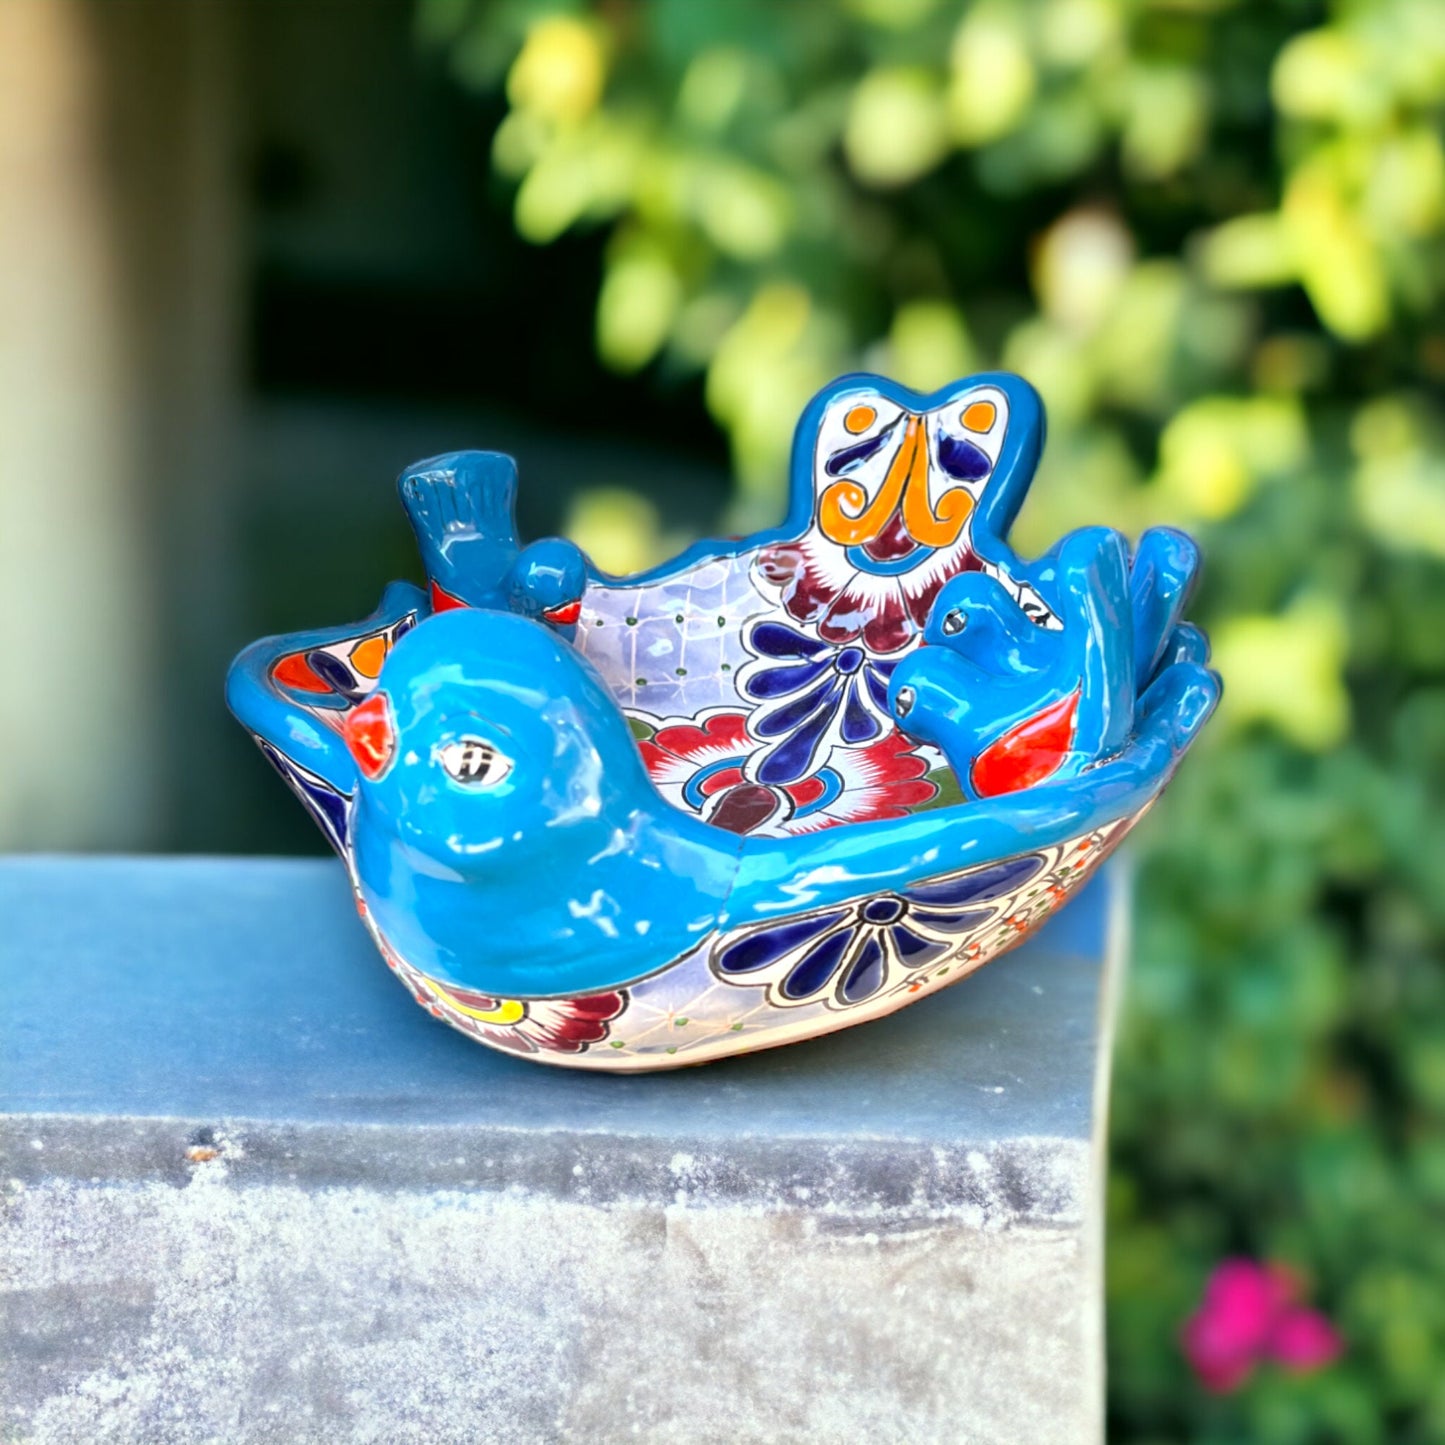 Colorful Talavera Bird Bath | Handcrafted Mexican Pottery with Beautiful Bird Design (Small)